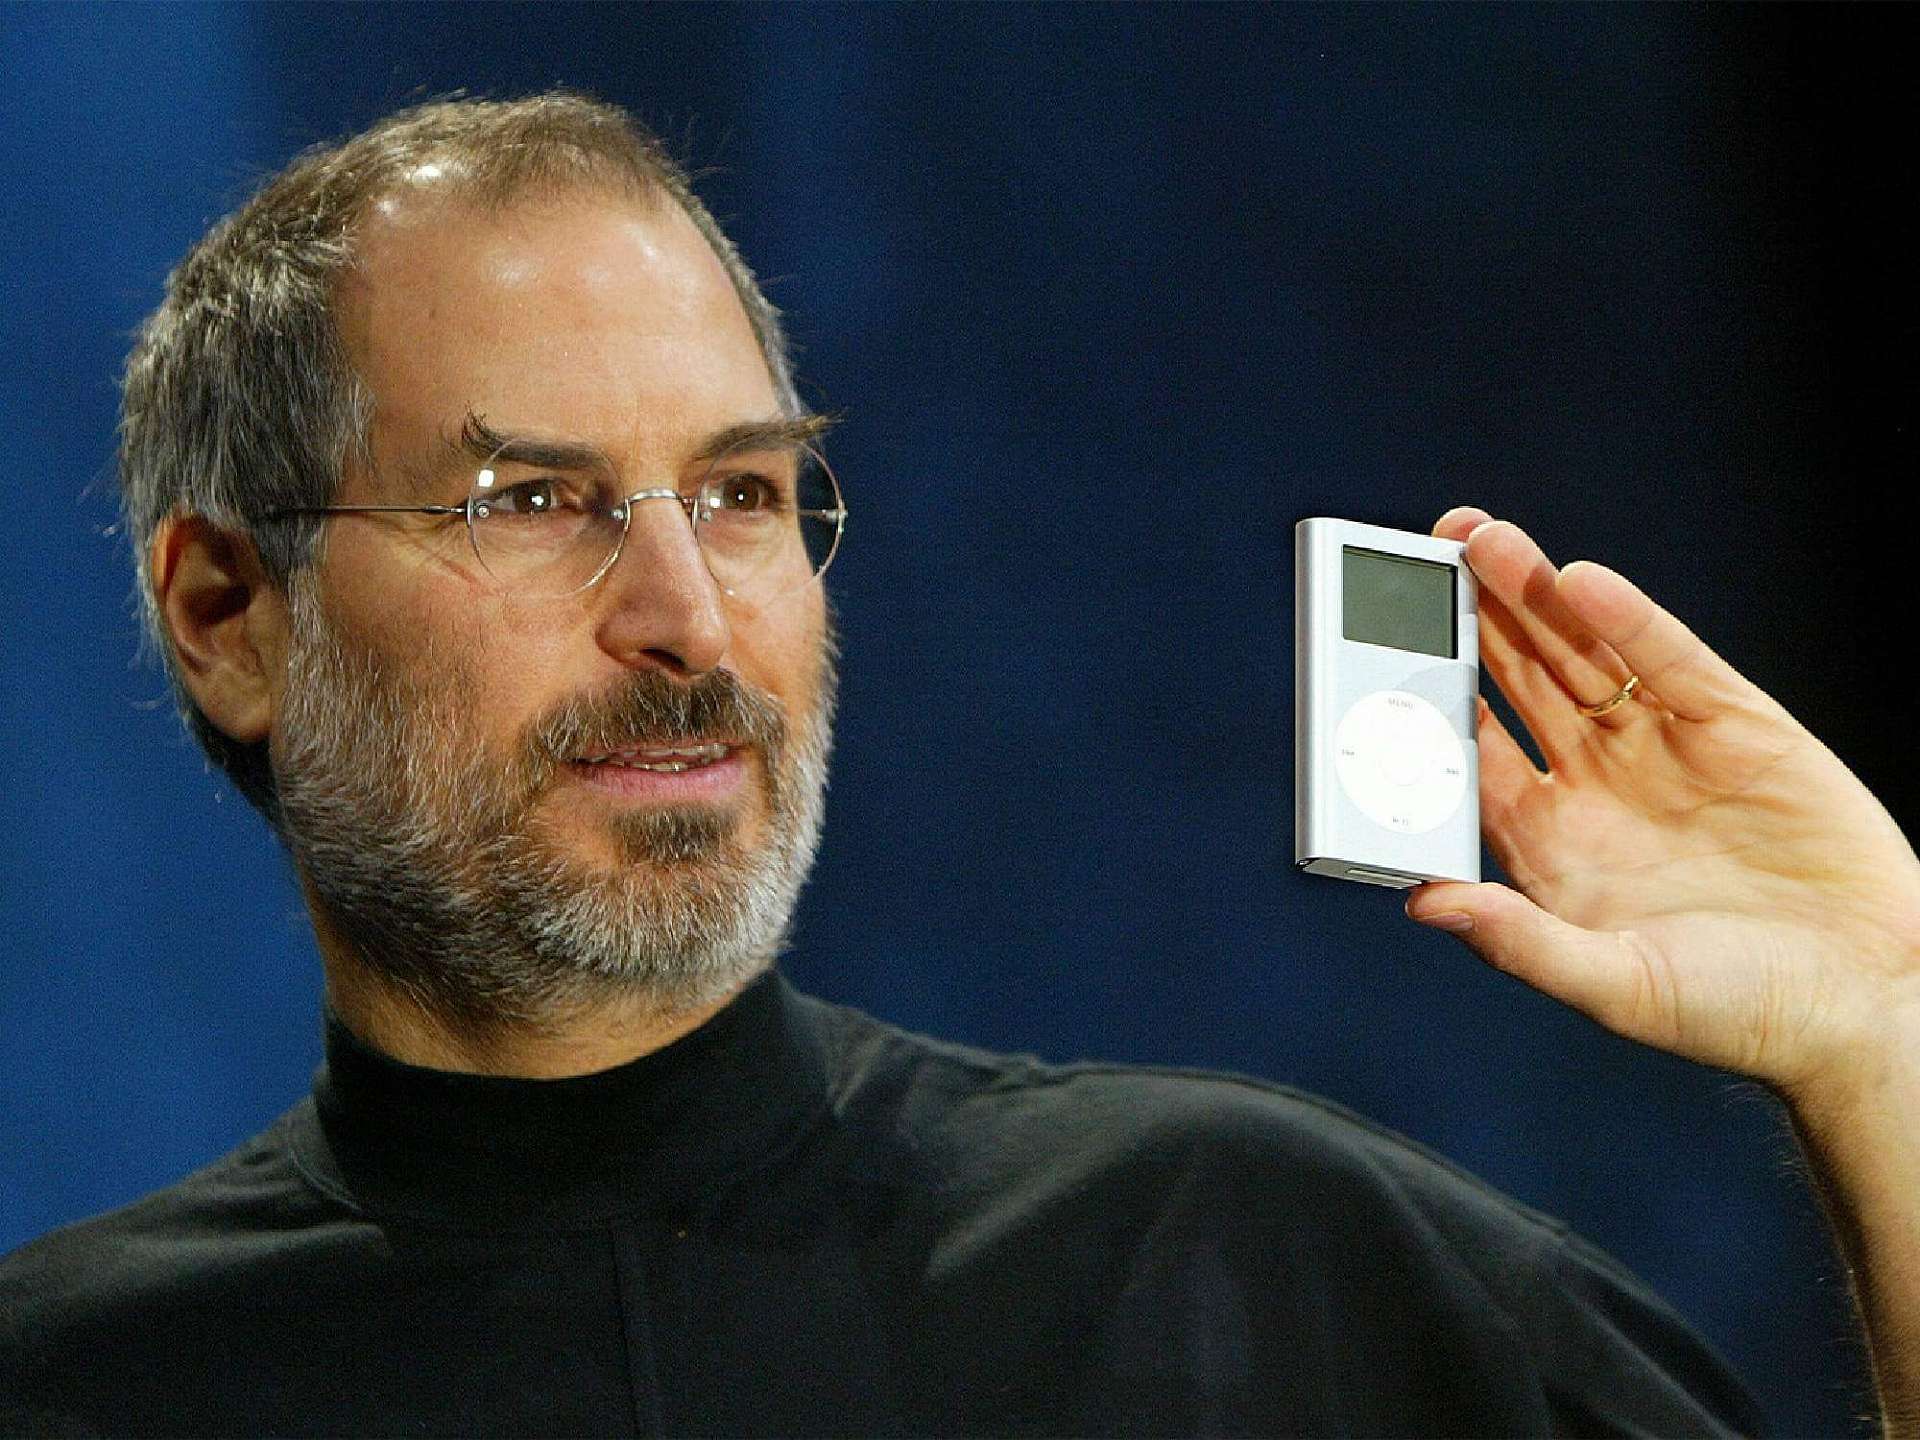 Apple stops the production of iPod after 22 years